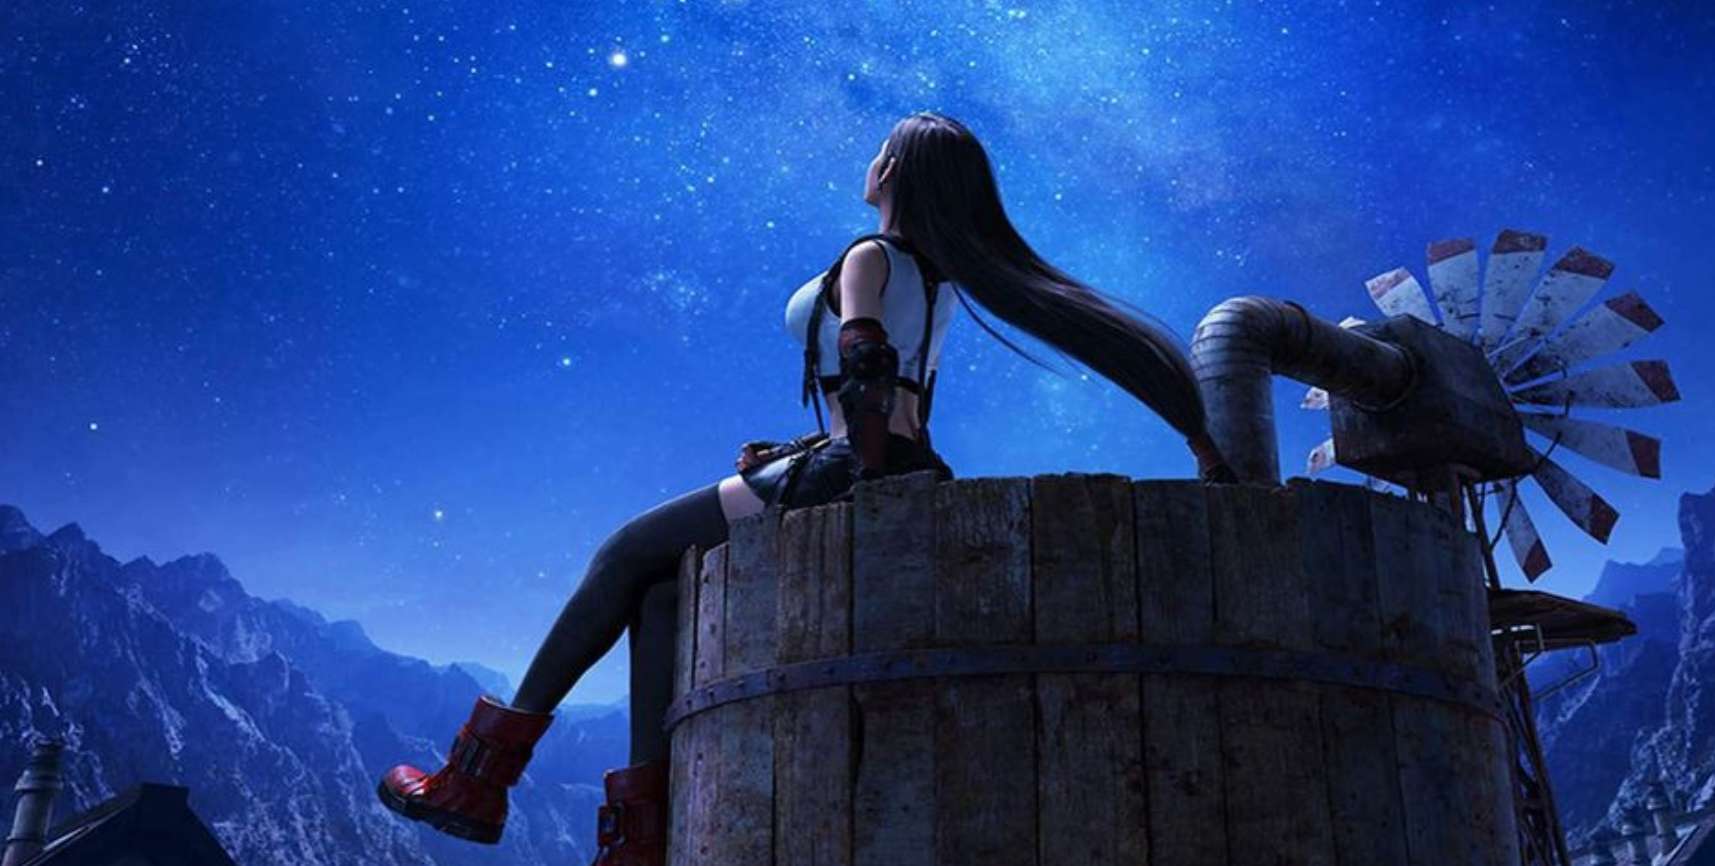 Dynamic Final Fantasy 7 Remake Tifa Theme For PlayStation 4 Is Now Available For Free In The PlayStation Store